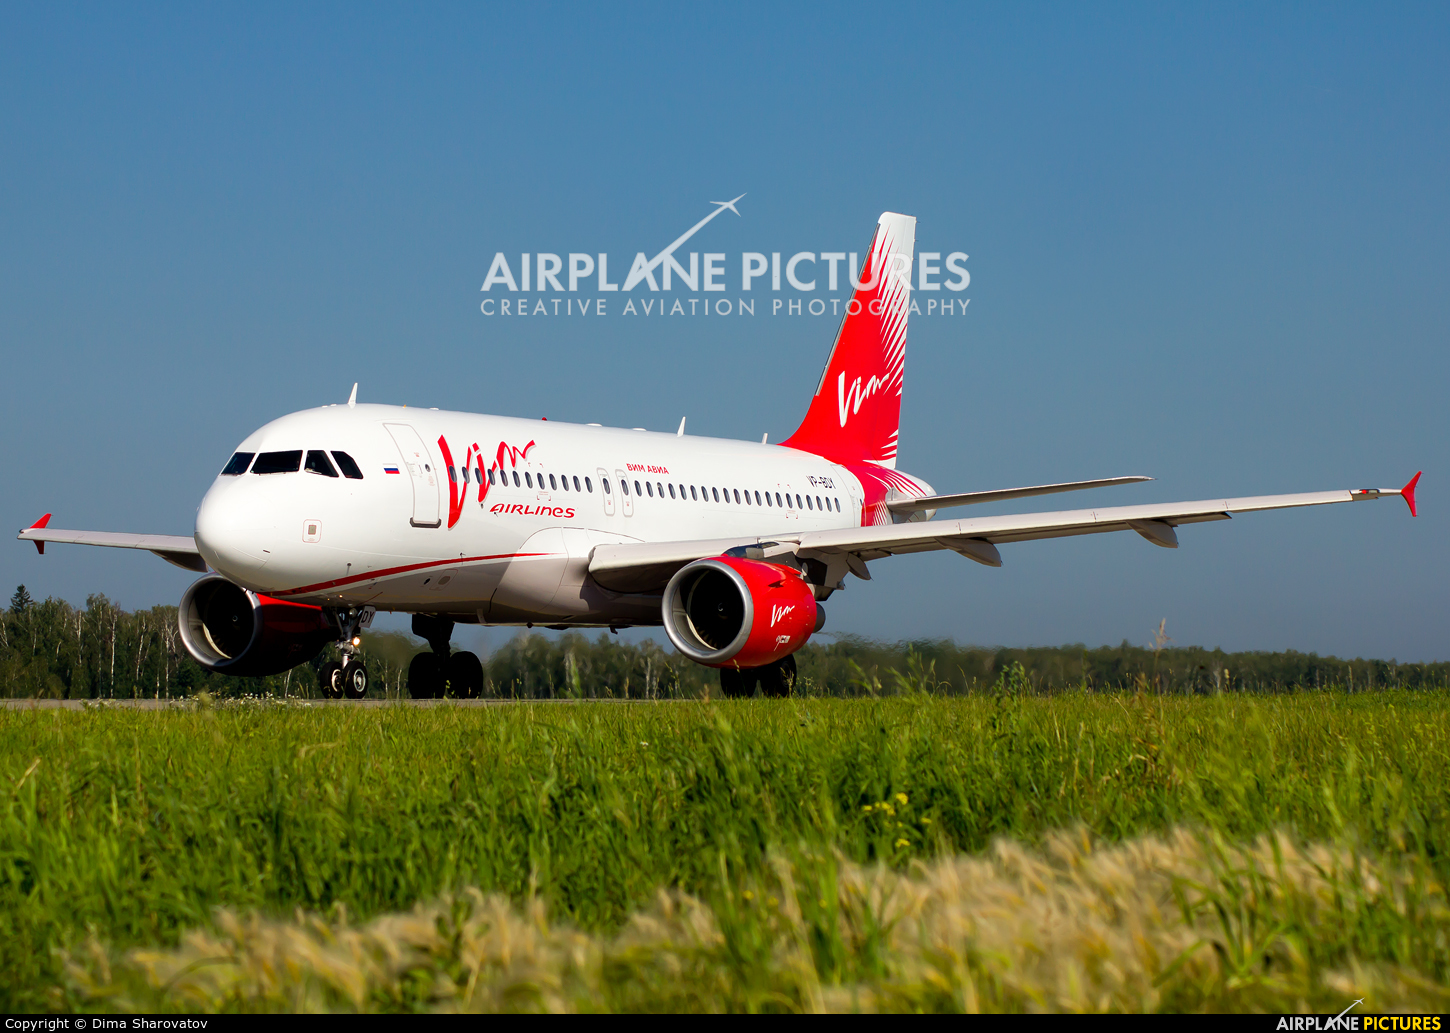 Vim Airlines VP-BDY aircraft at Moscow - Domodedovo